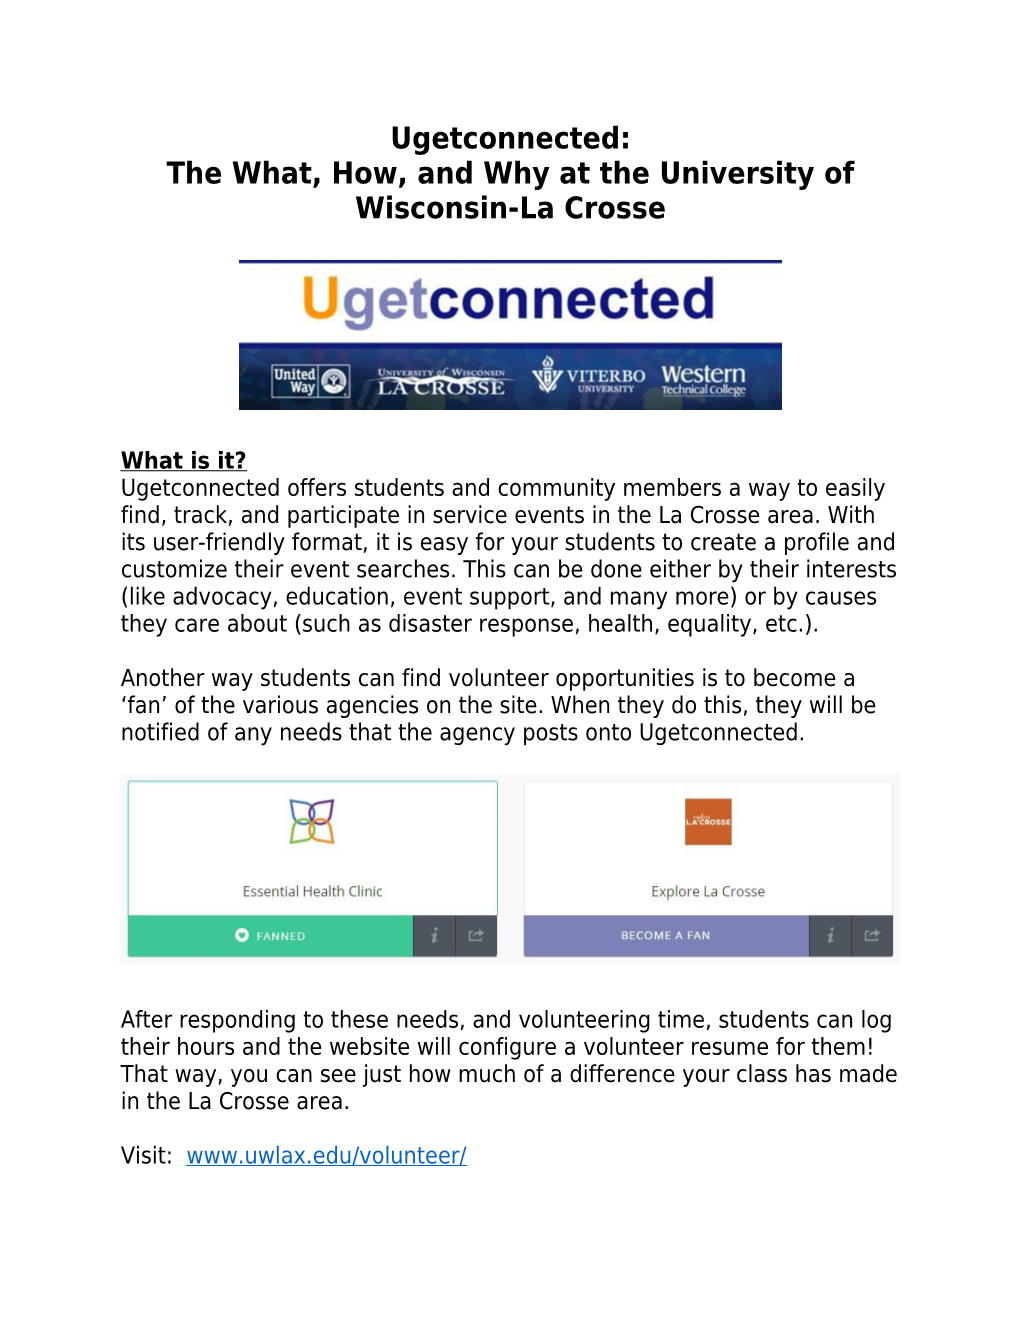 The What, How, and Why at the University of Wisconsin-La Crosse